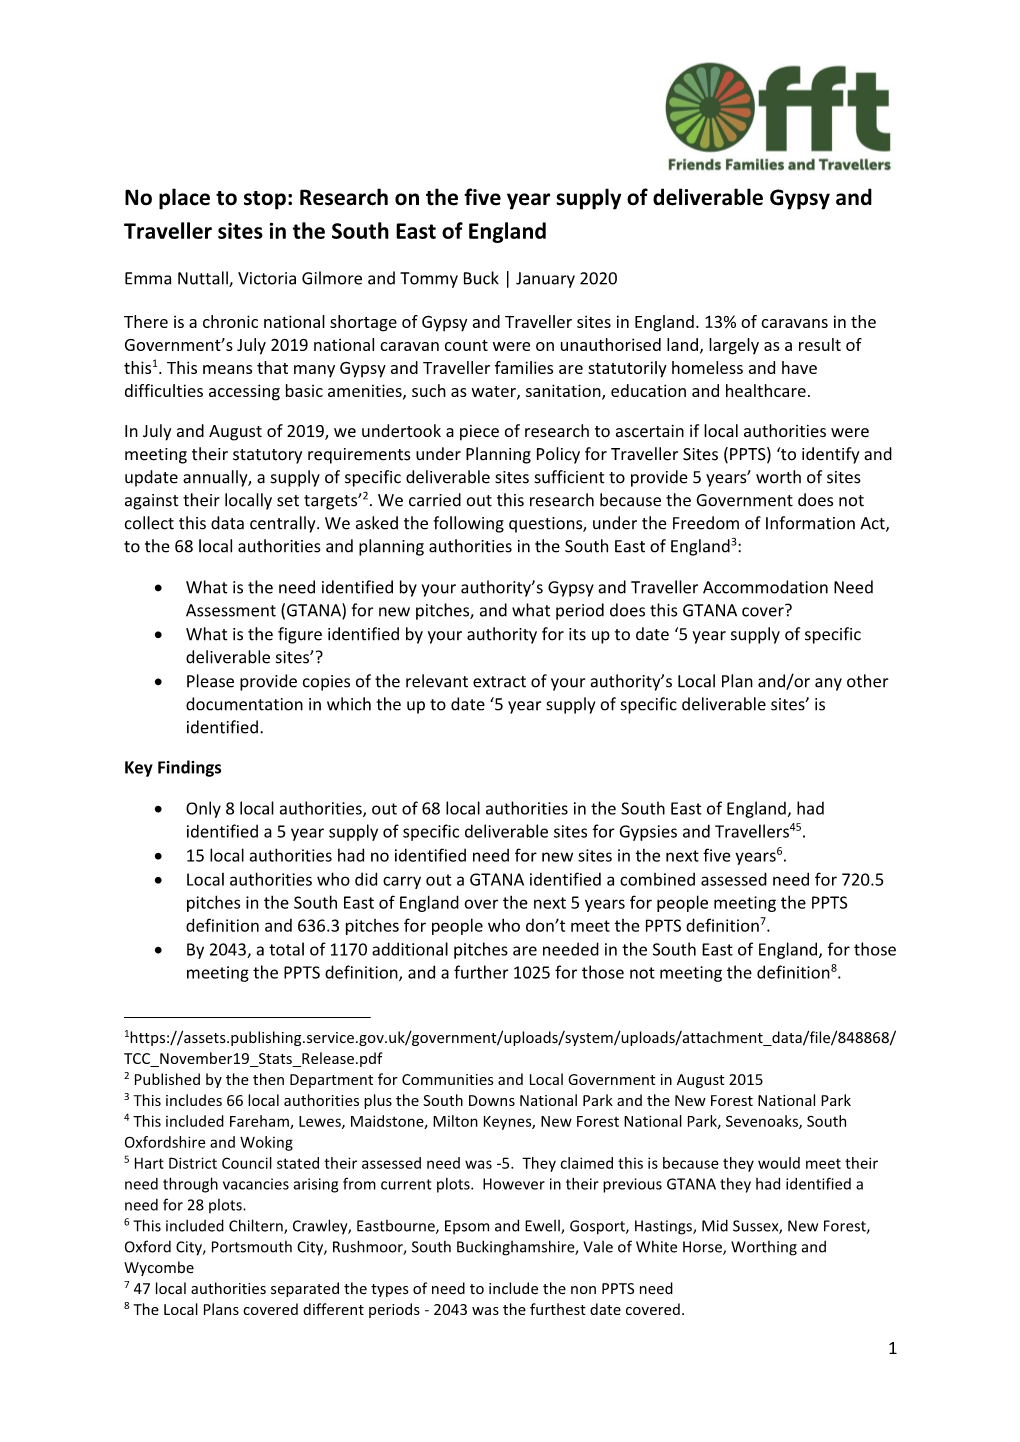 Research on the Five Year Supply of Deliverable Gypsy and Traveller Sites in the South East of England